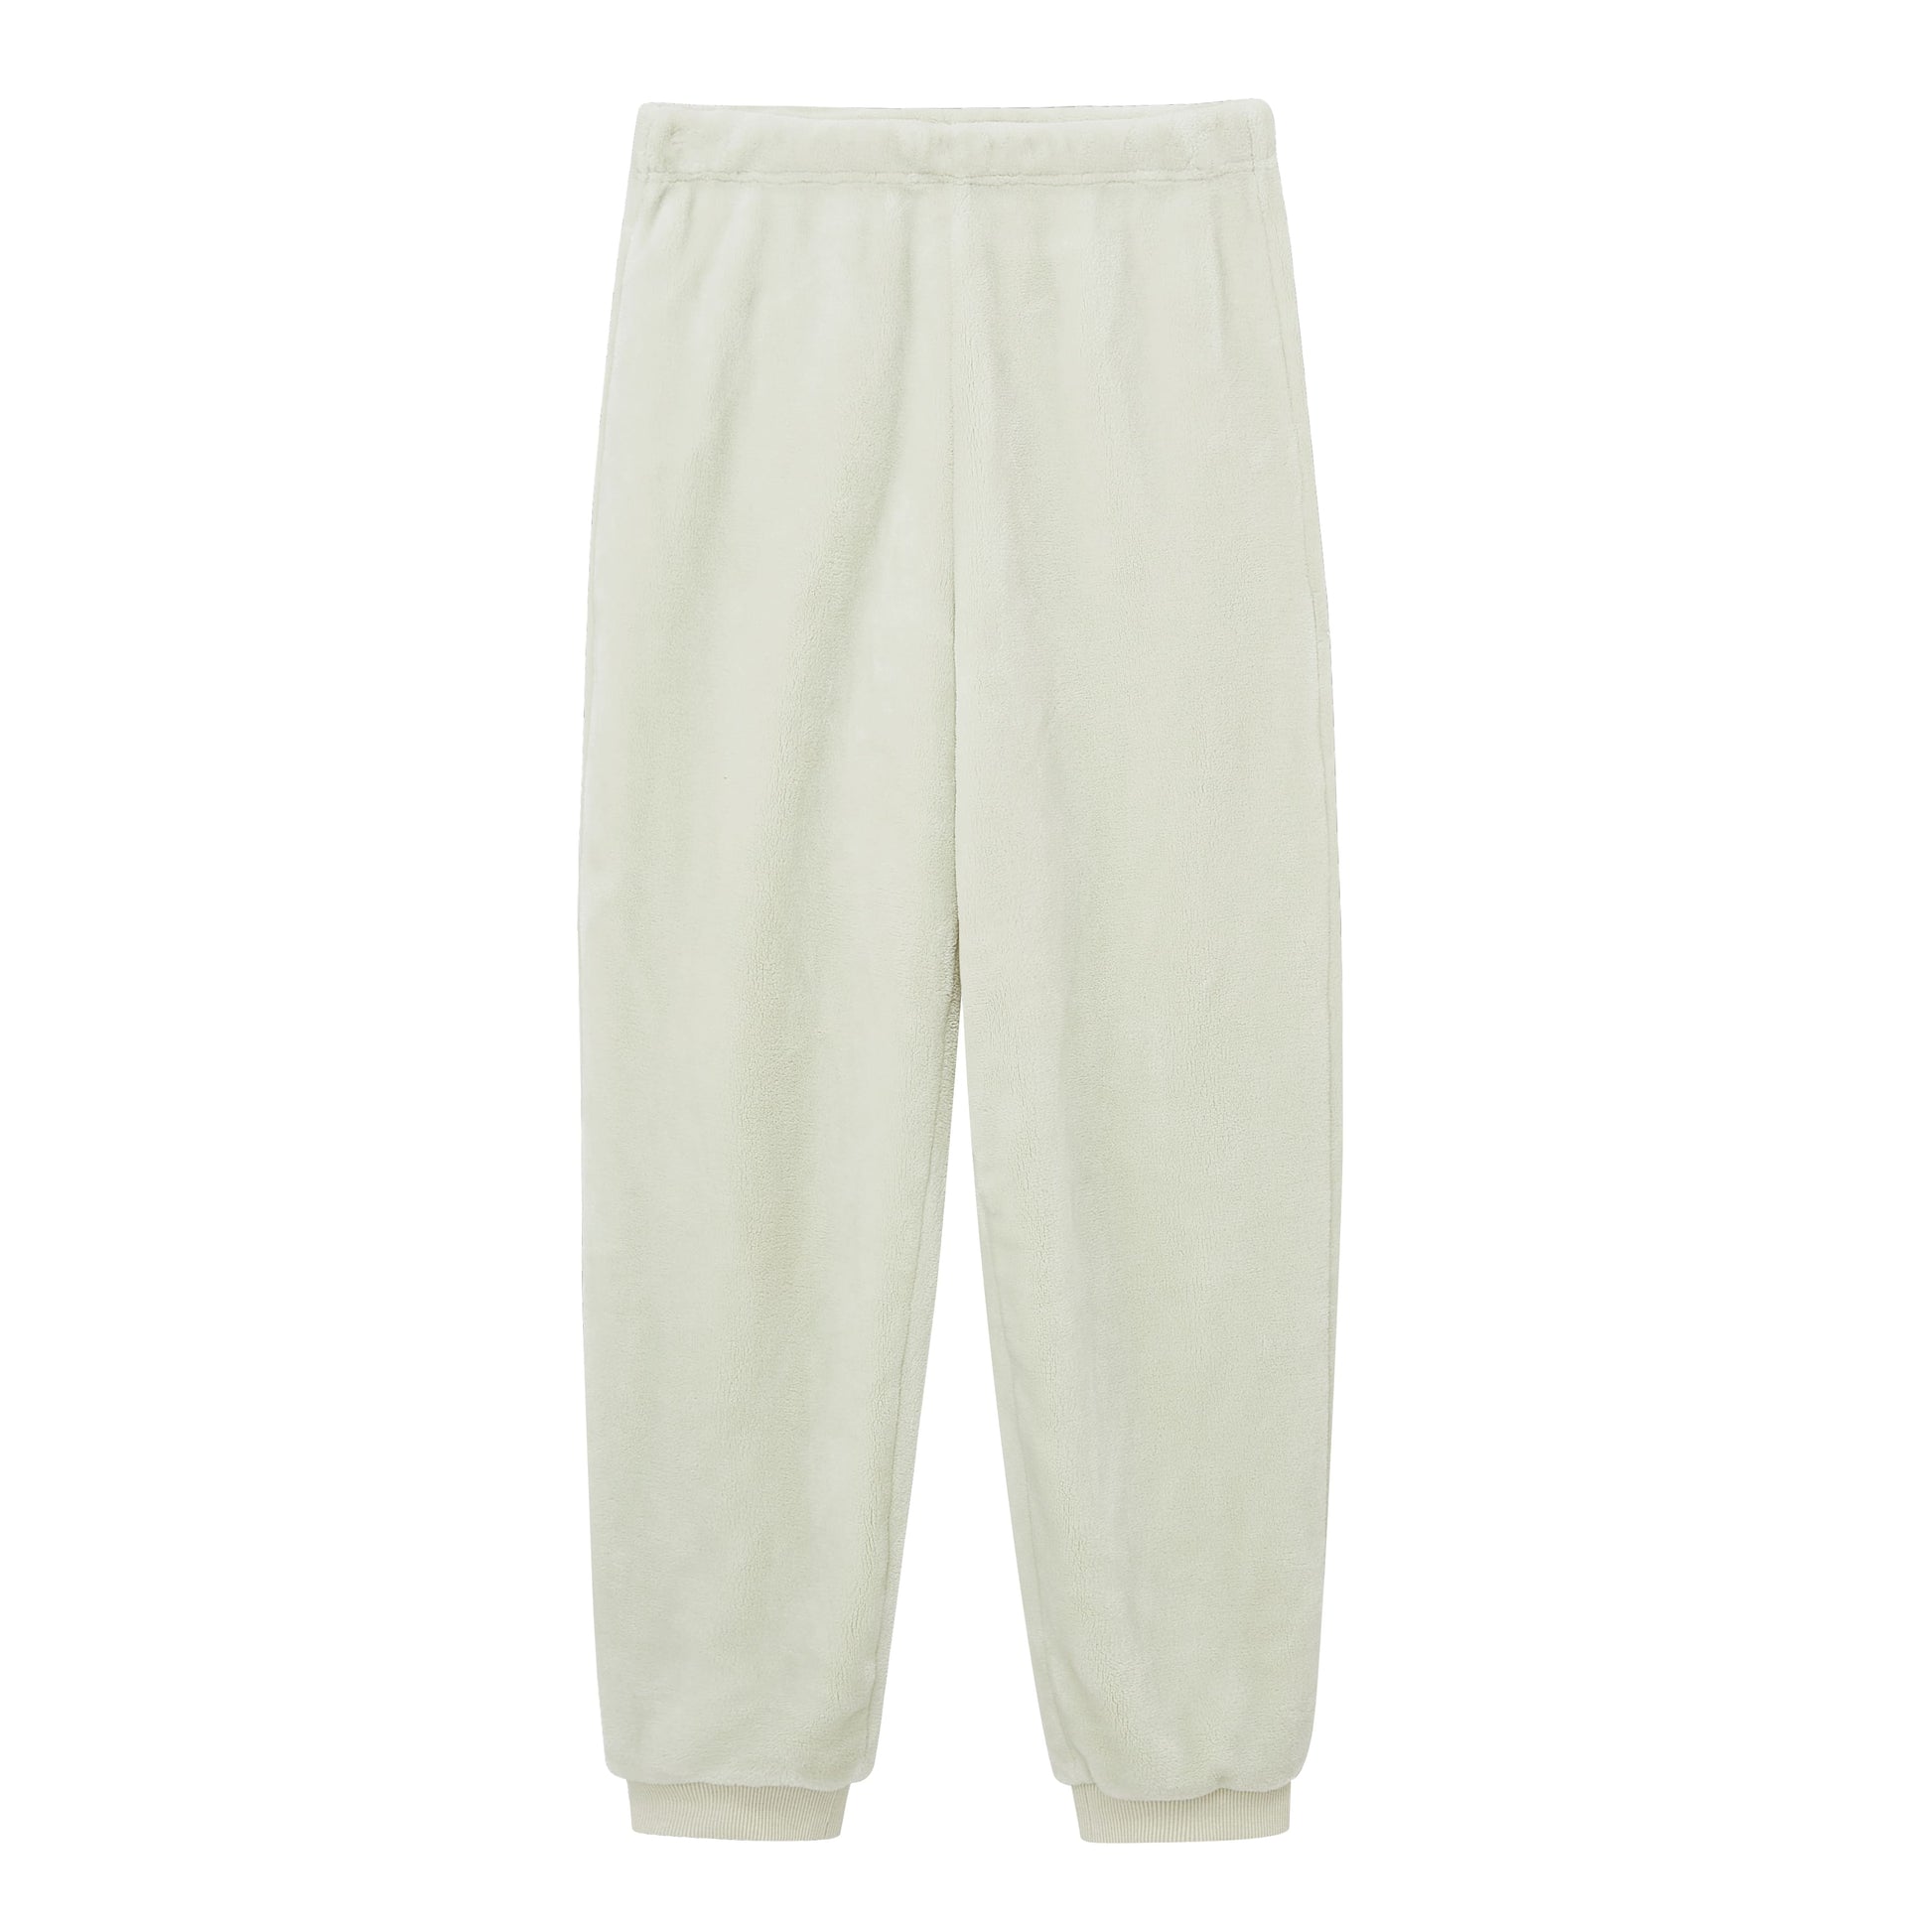 Women's Green Pajama Bottoms gifts - up to −78%